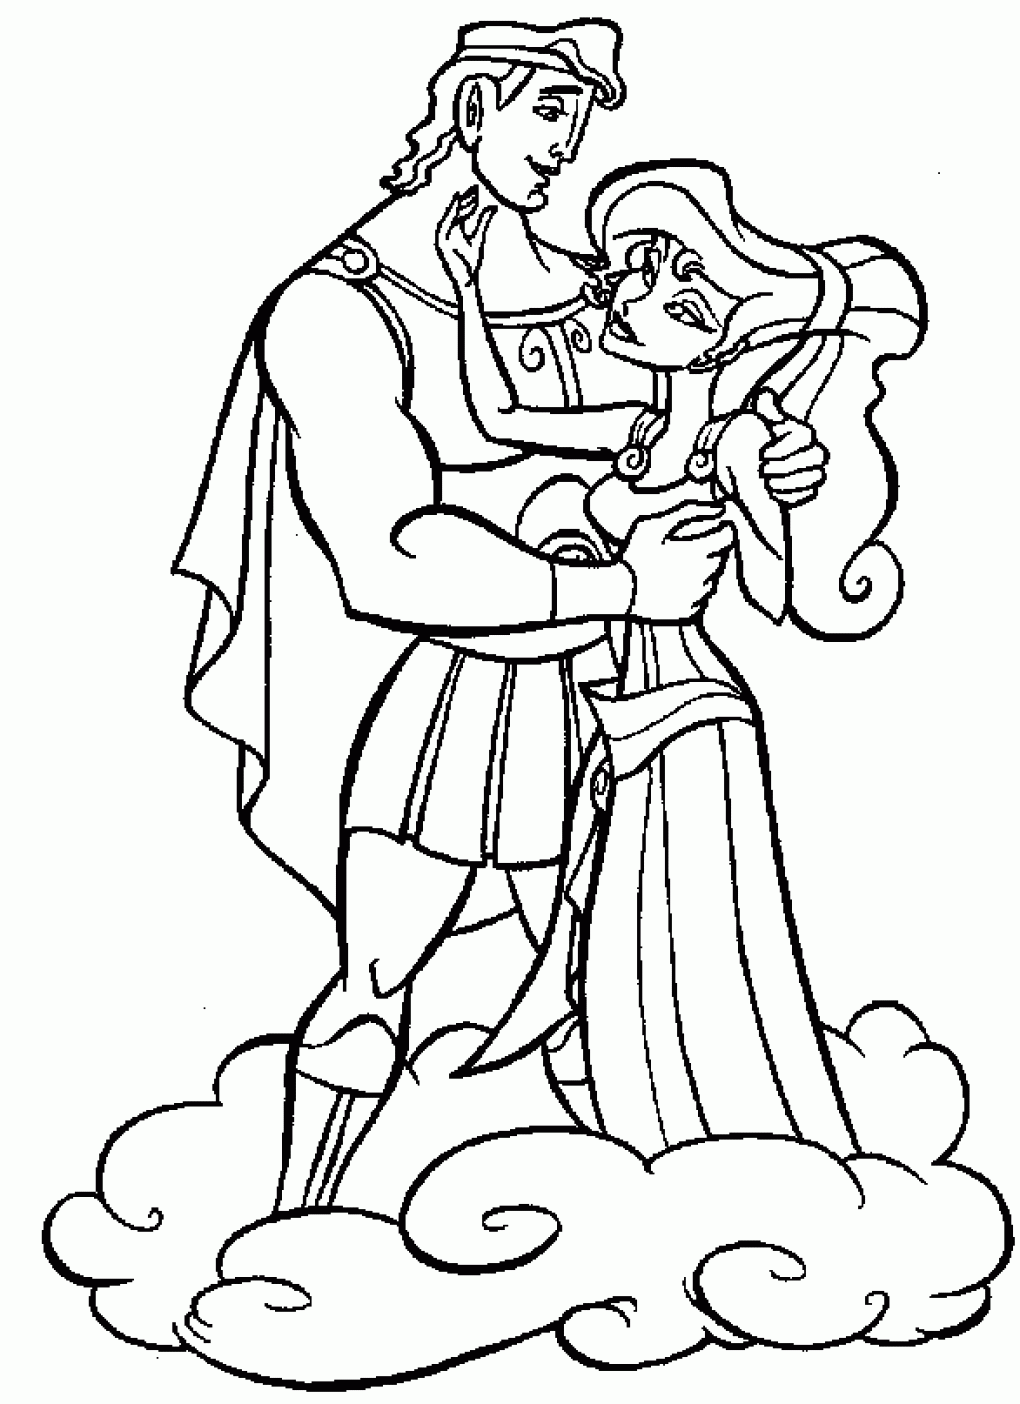 Free Printable Hercules Coloring Pages For Kids Effy Moom Free Coloring Picture wallpaper give a chance to color on the wall without getting in trouble! Fill the walls of your home or office with stress-relieving [effymoom.blogspot.com]